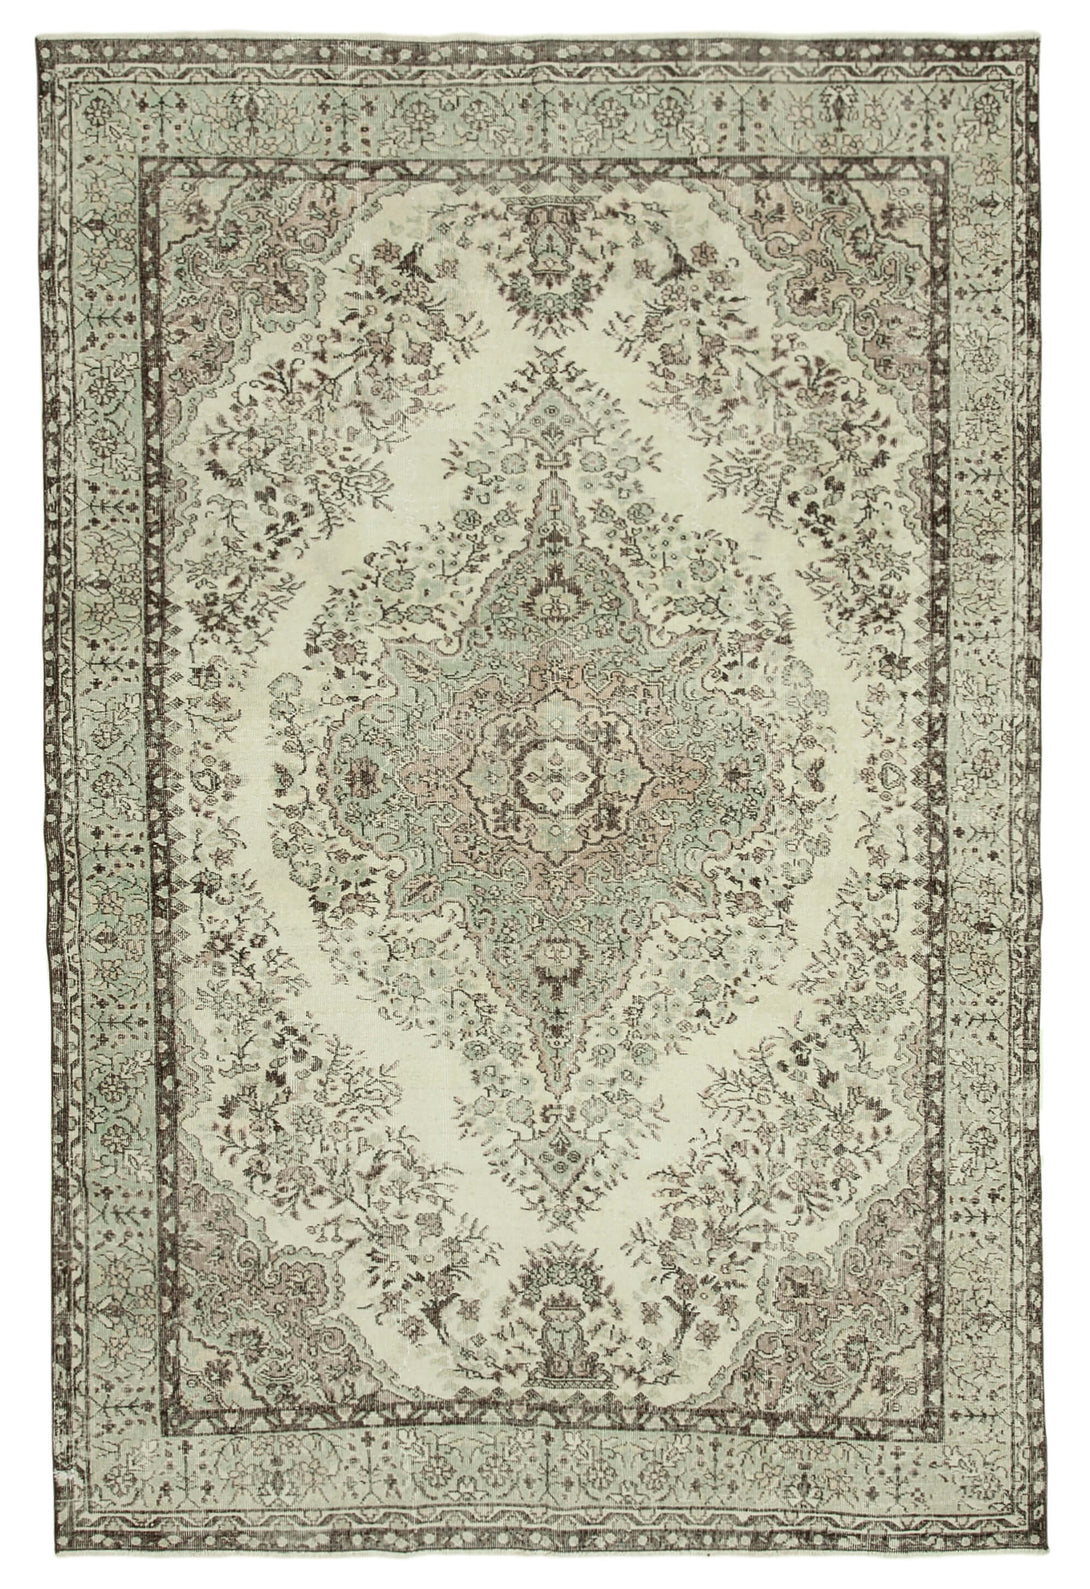 Handmade White Wash Area Rug > Design# OL-AC-36875 > Size: 6'-9" x 10'-5", Carpet Culture Rugs, Handmade Rugs, NYC Rugs, New Rugs, Shop Rugs, Rug Store, Outlet Rugs, SoHo Rugs, Rugs in USA